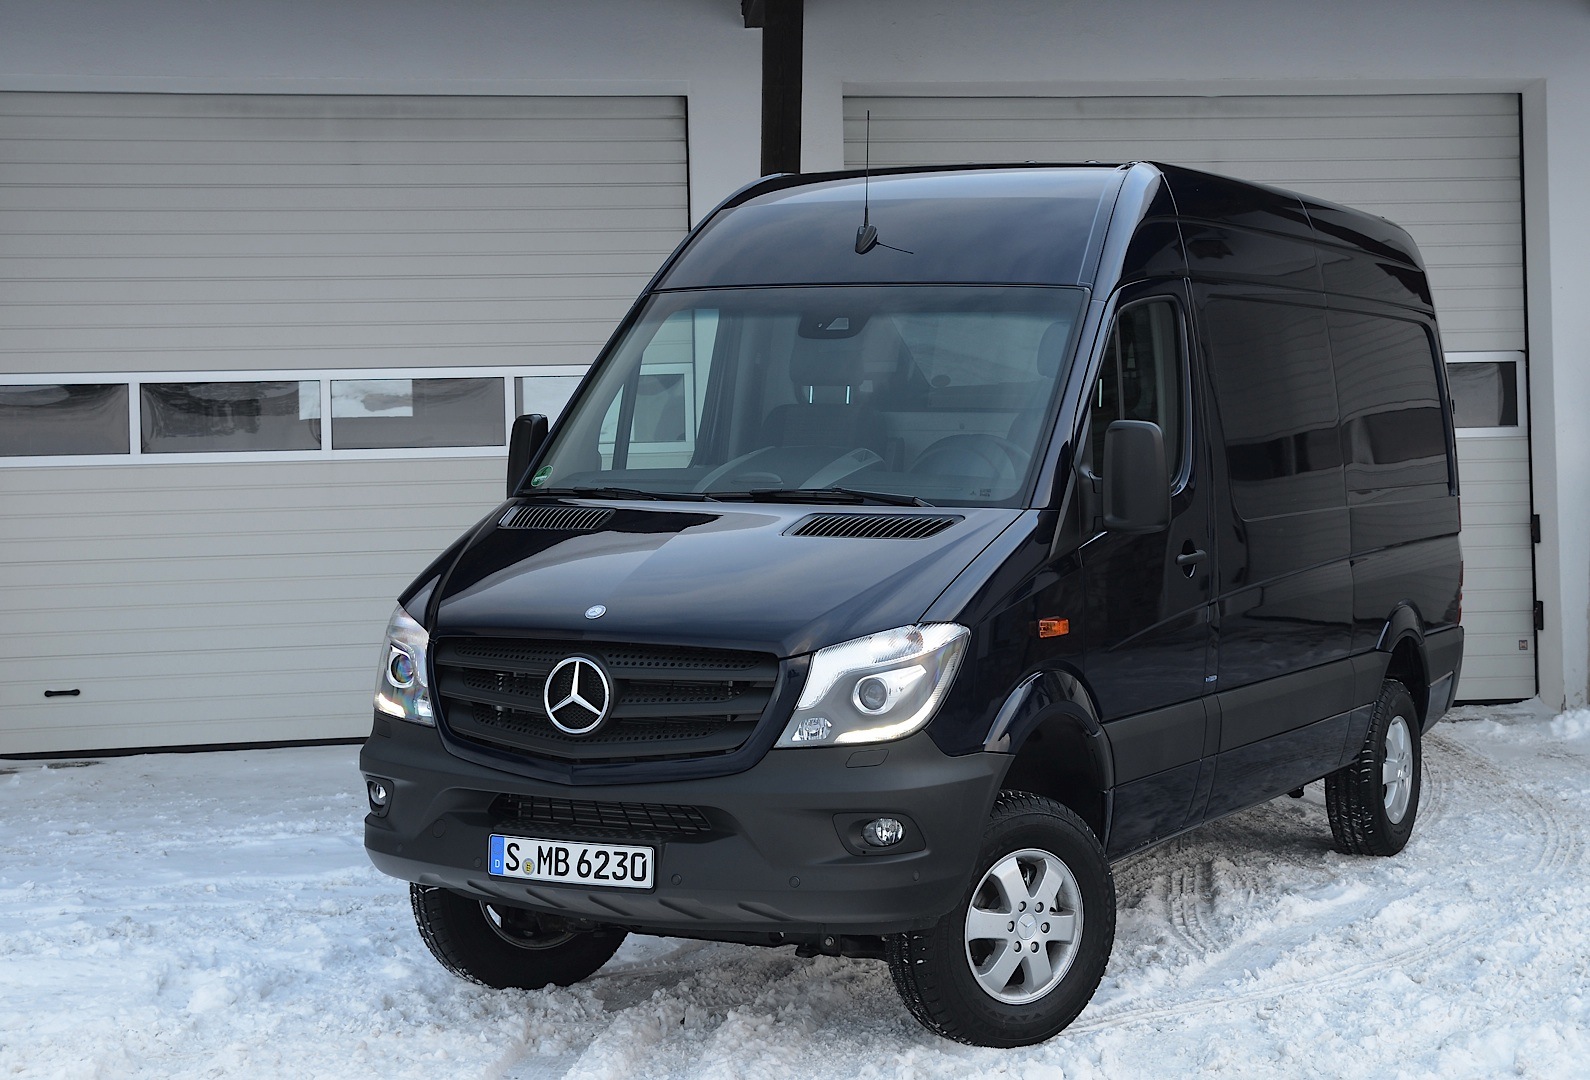 MercedesBenz Sprinter 4x4 is on Its Way to The United States